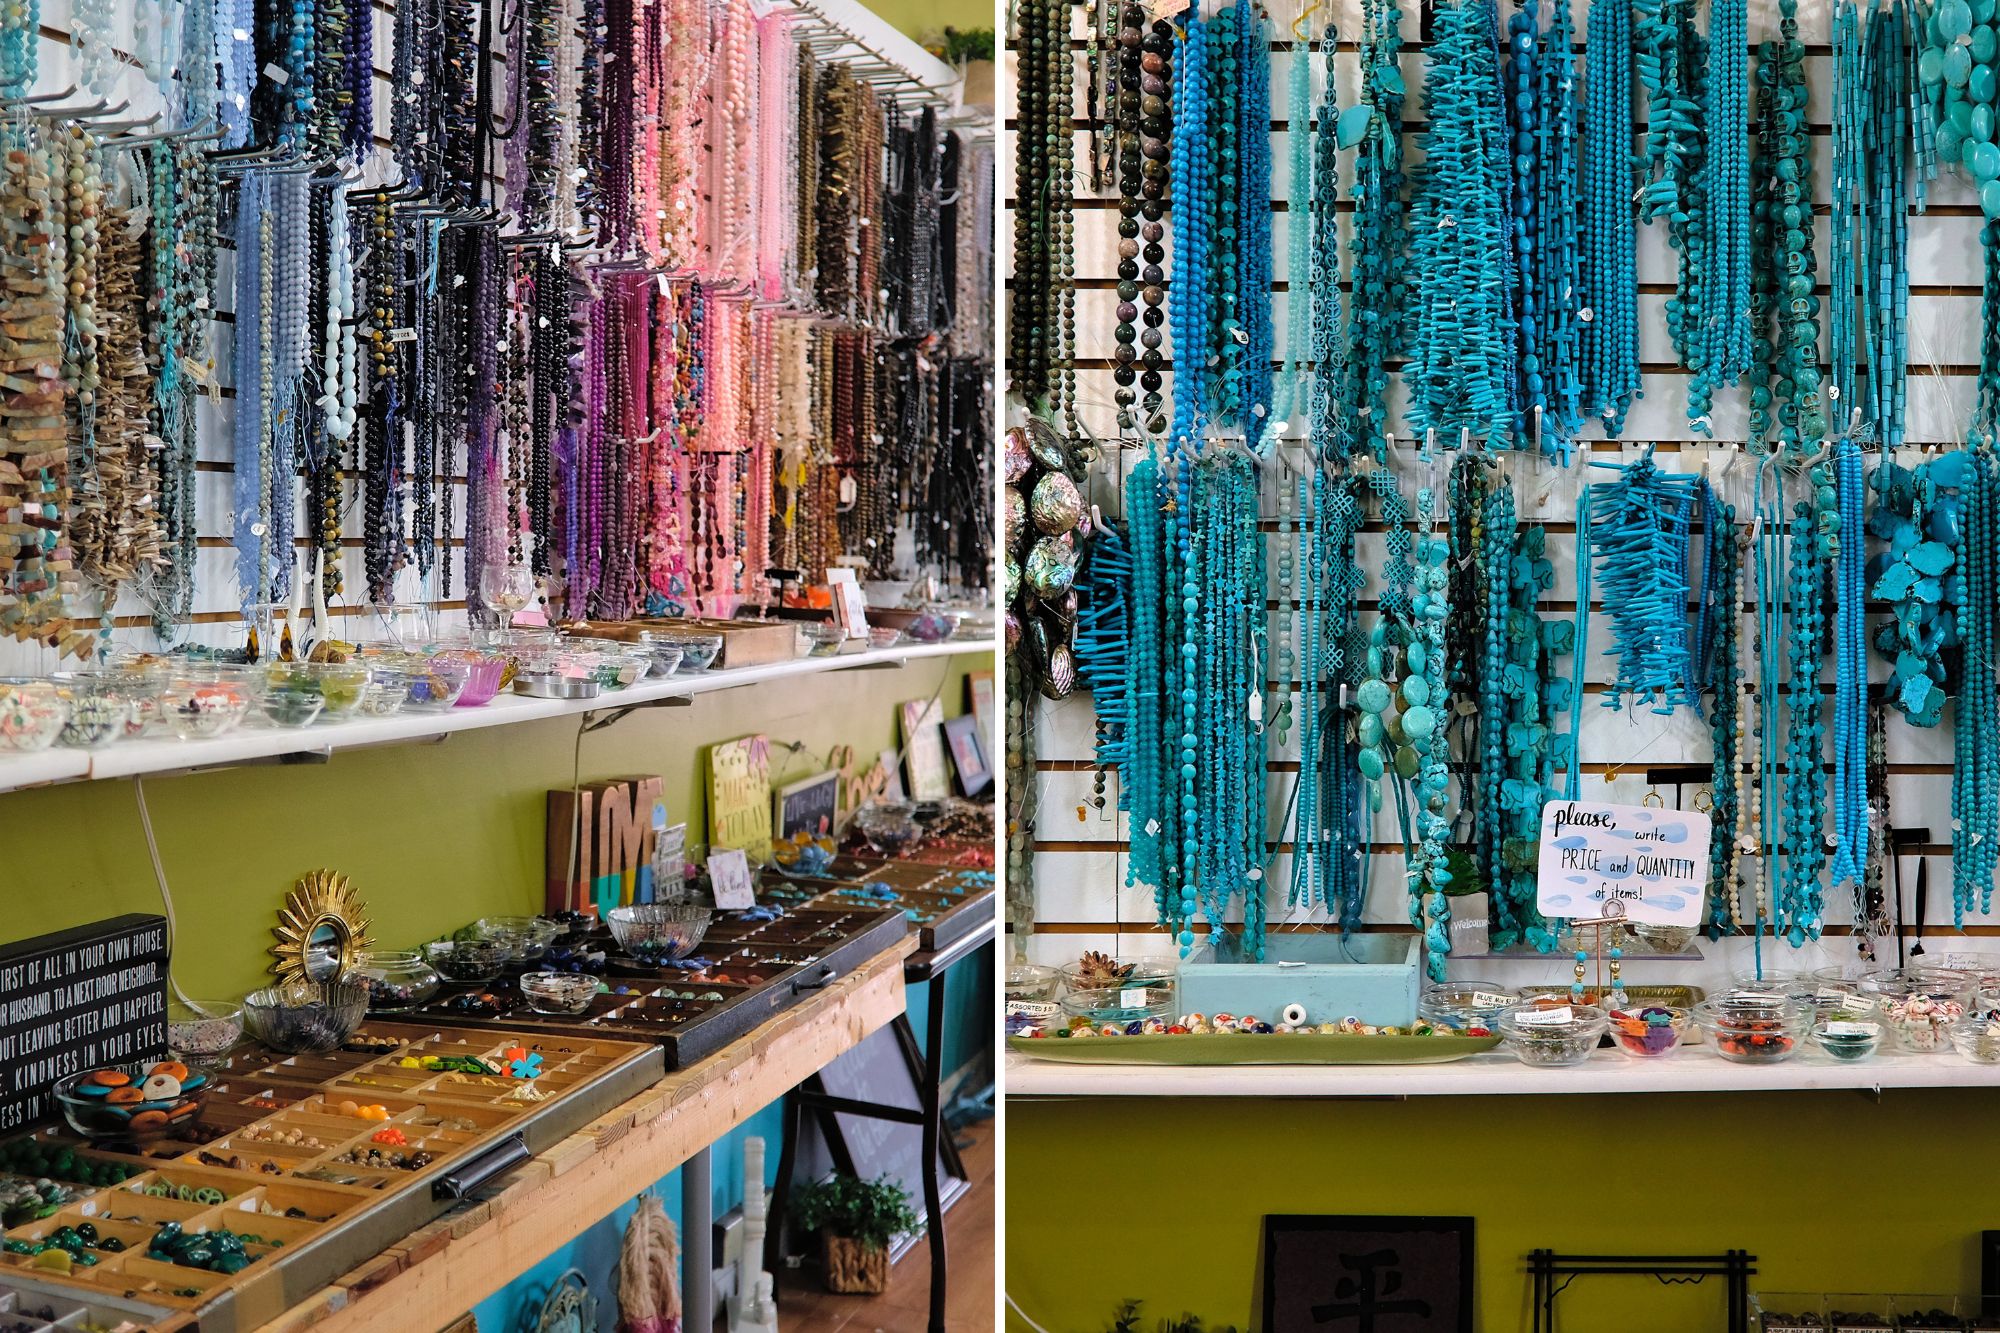 Two images of beads at The Bead Lady in Concord